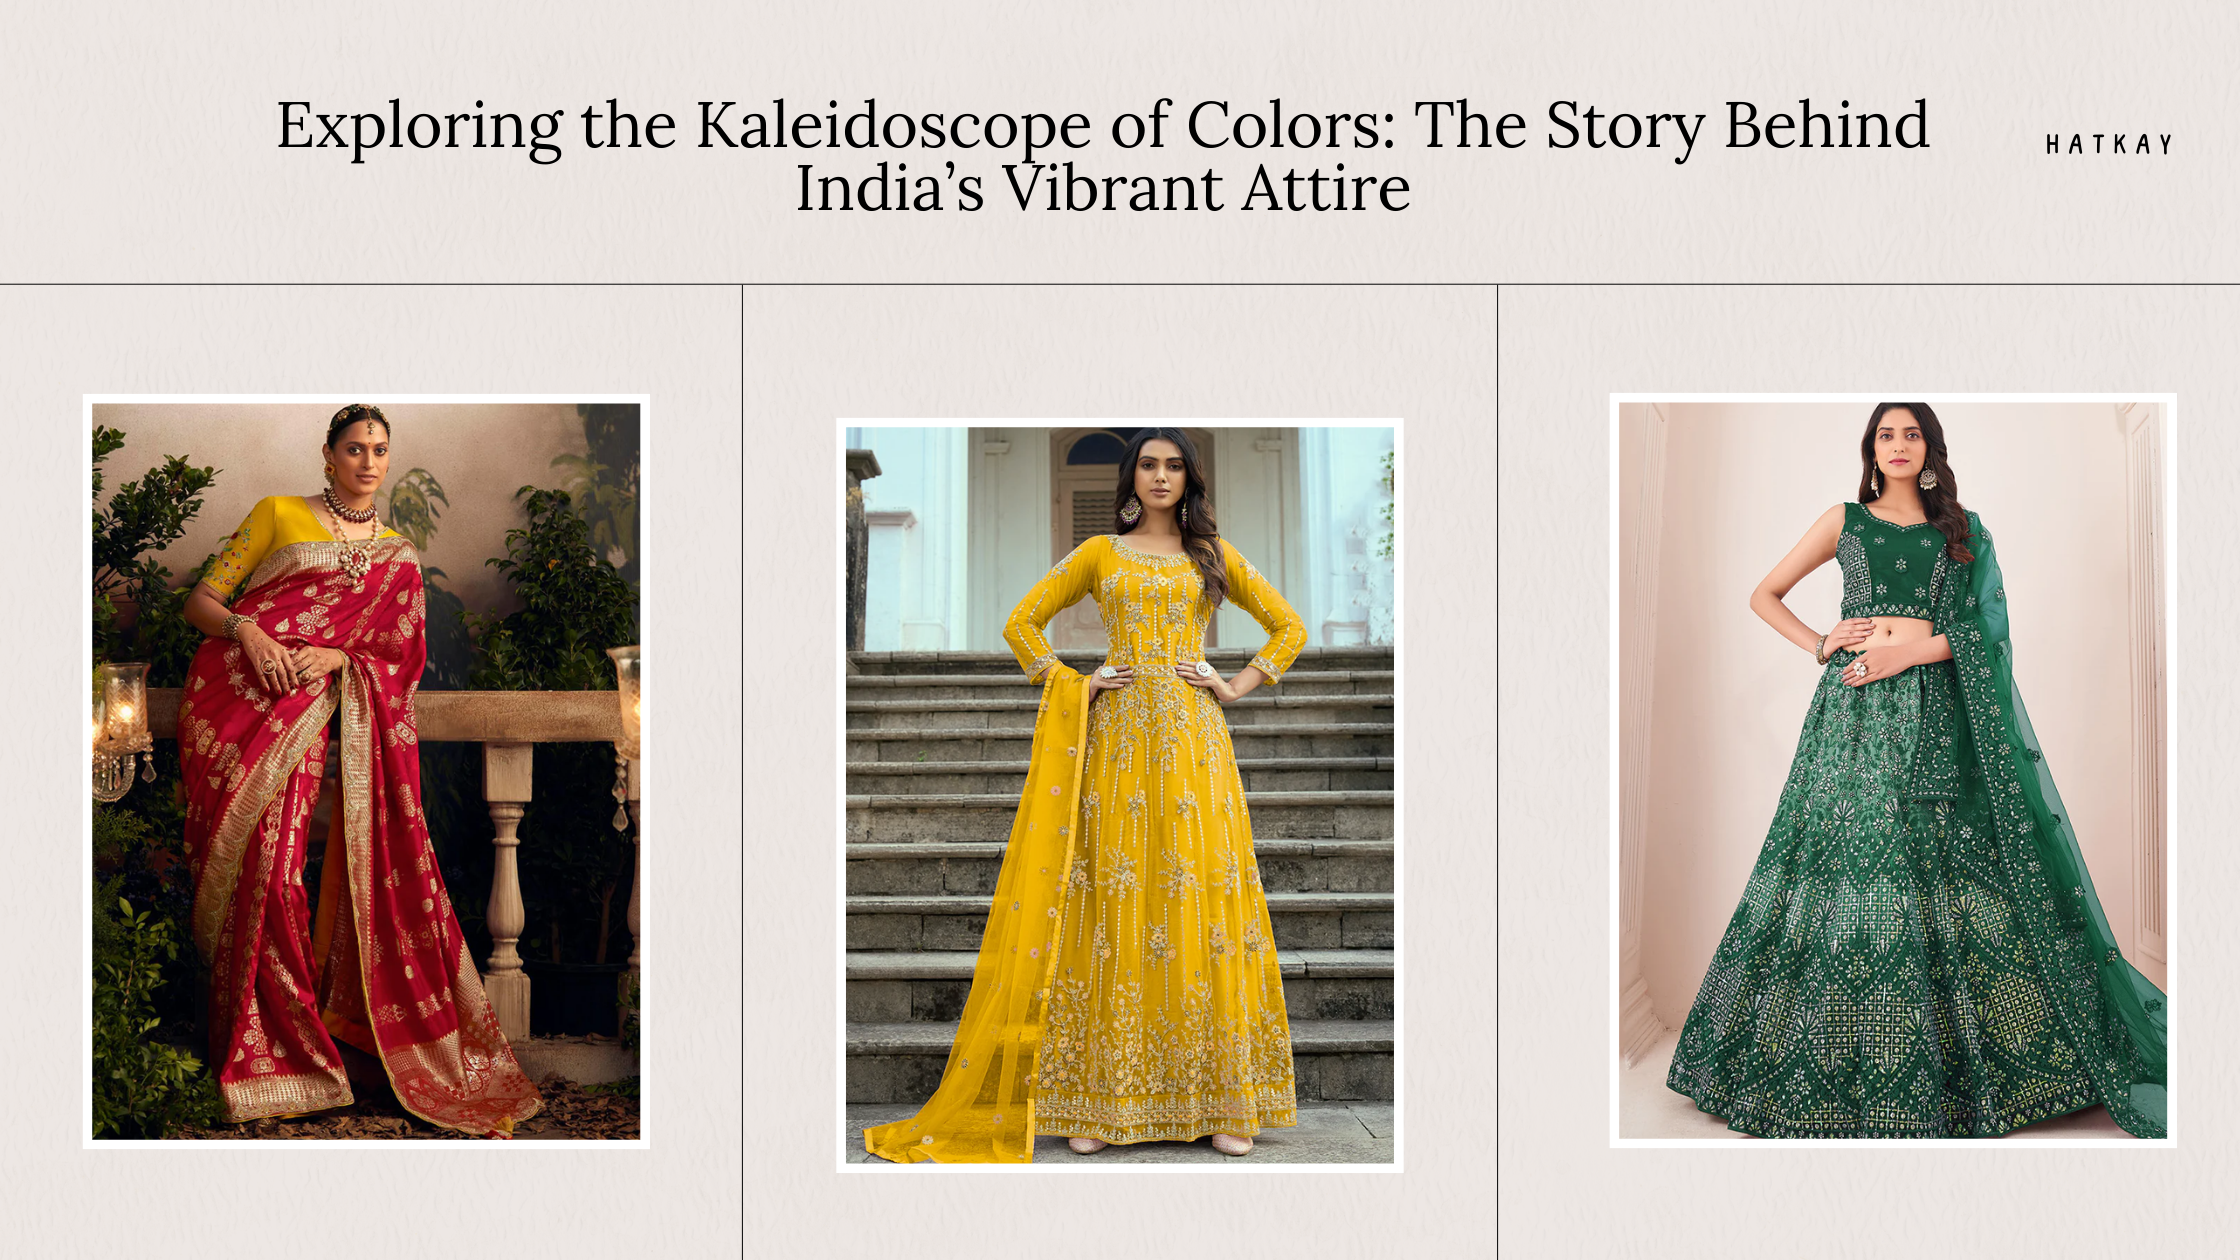 Exploring the Kaleidoscope of Colors: The Story Behind India’s Vibrant Attire